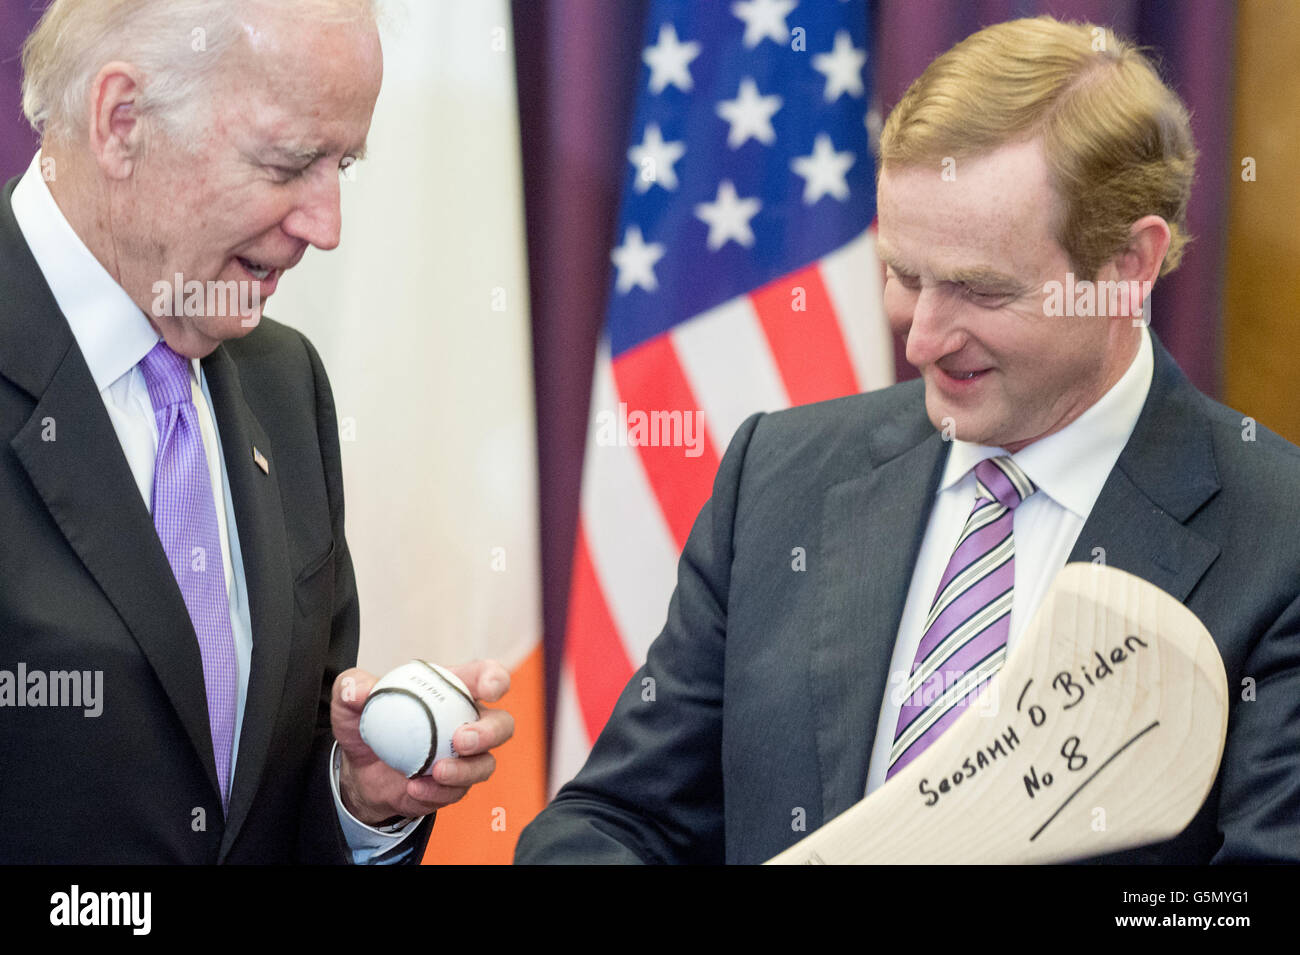 Taoiseach Enda Kenny (right) welcomes United States Vice-President Joe Biden to Government Buildings, Dublin, Ireland at the start of his six day visit and gives him a gift of a hurling stick and sliothar, and the hurling stick has the vie-president's name written in Gaelic on it. Stock Photo